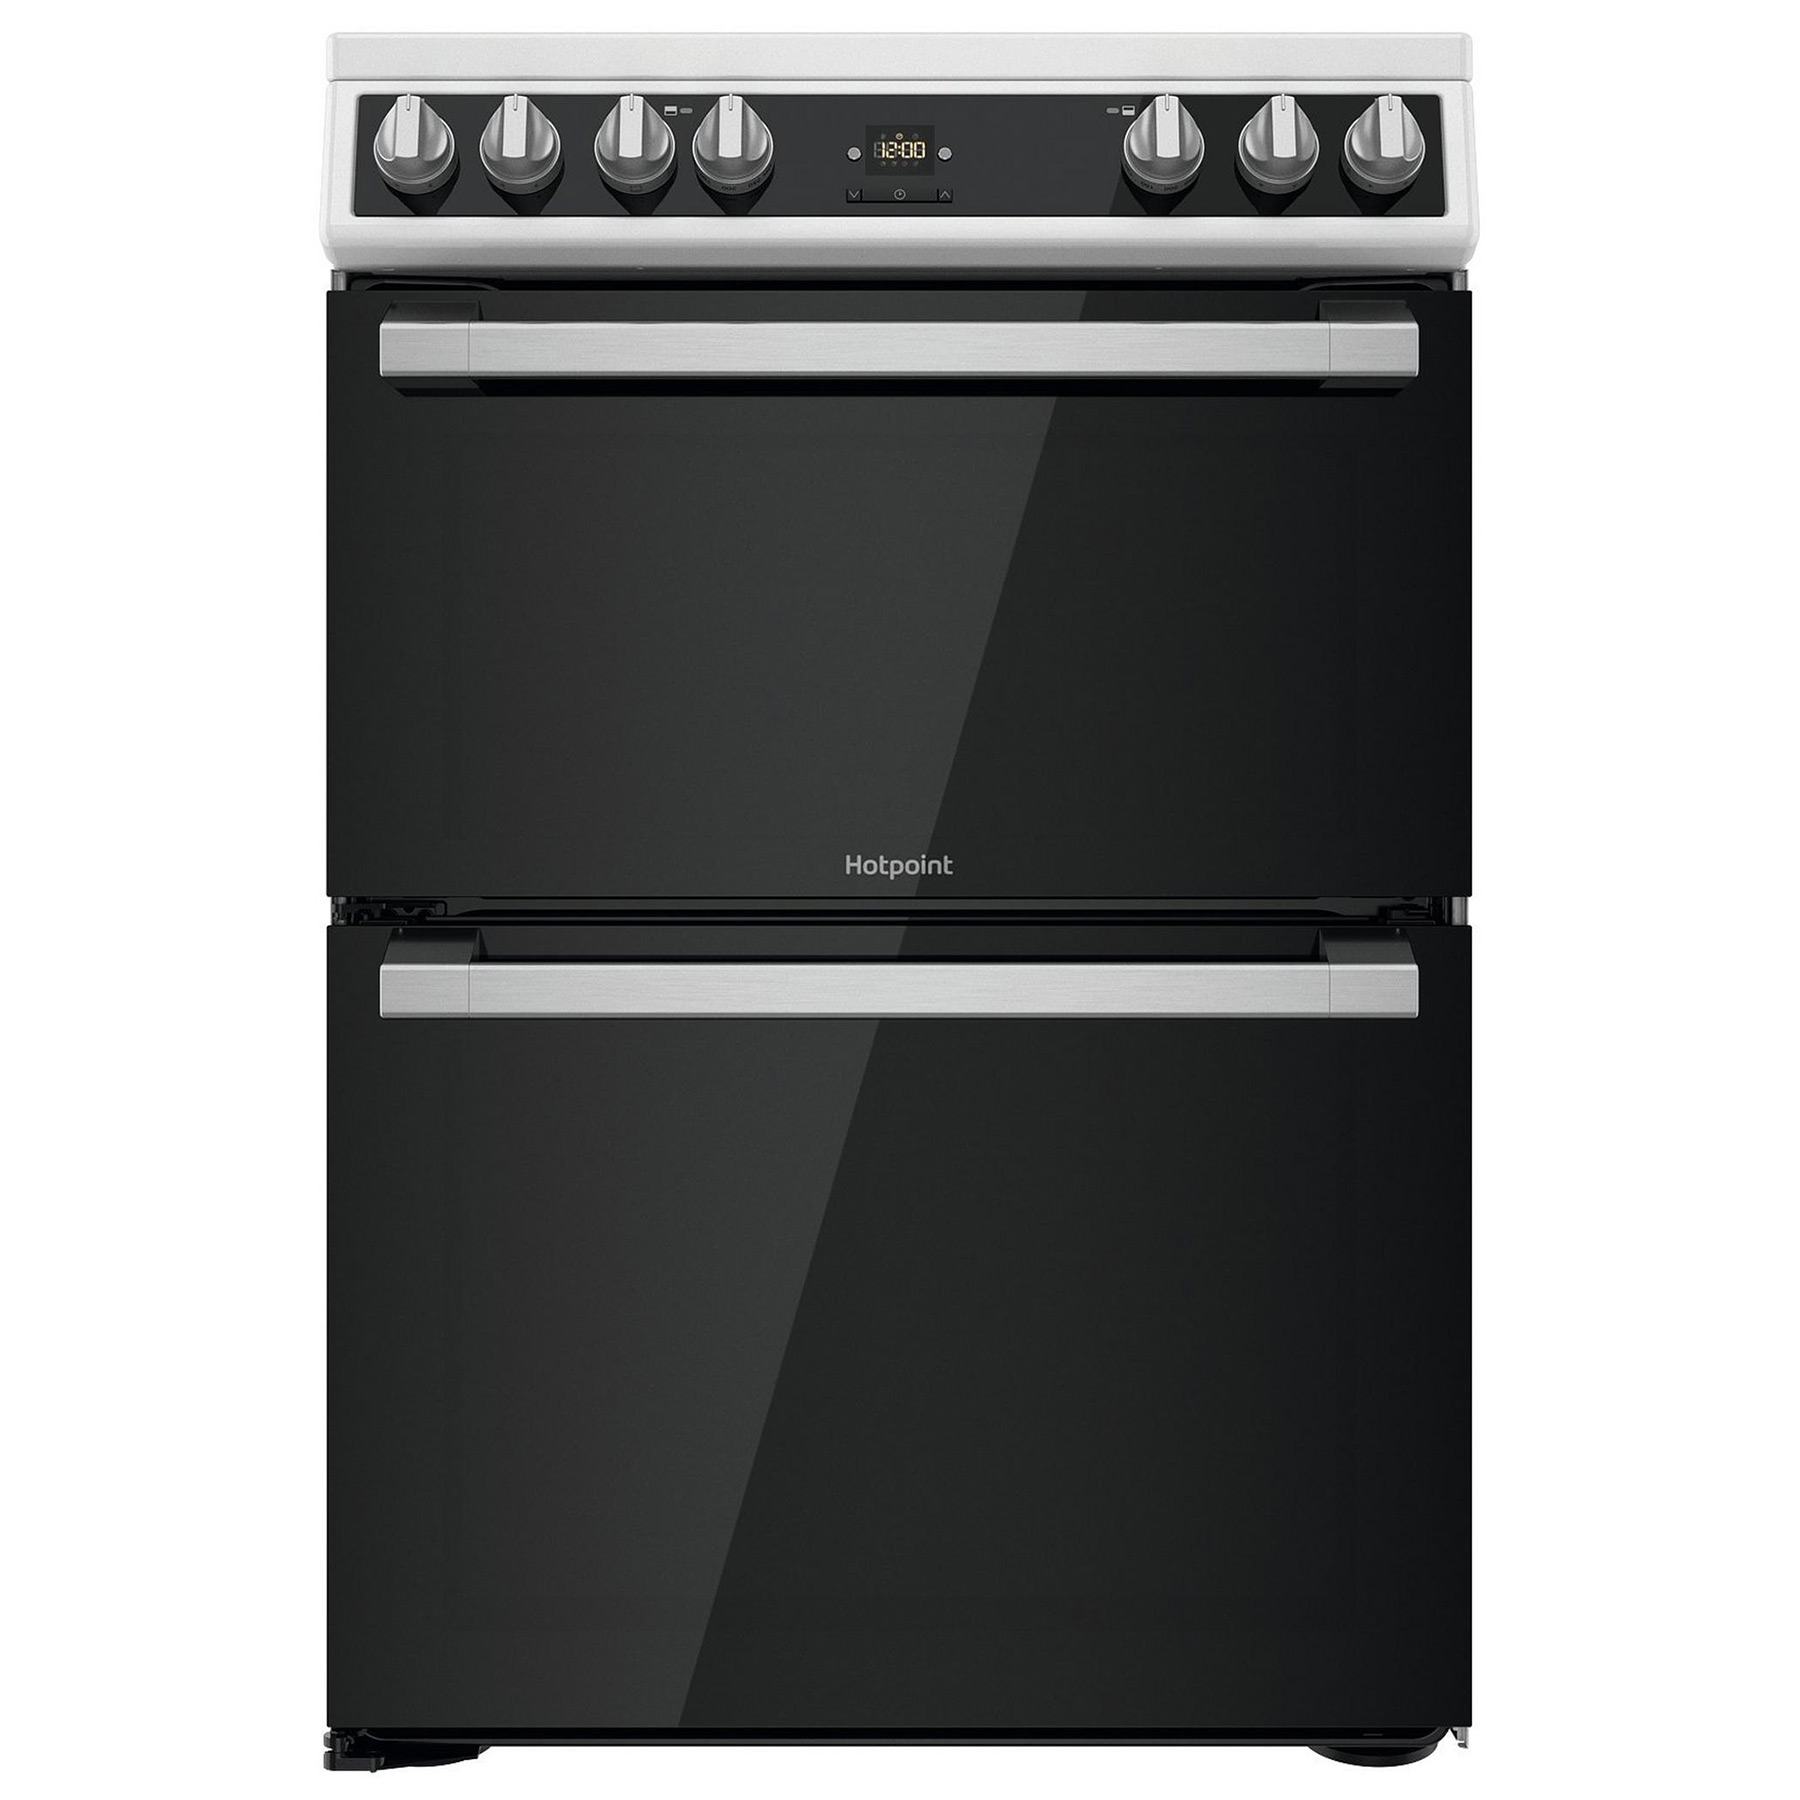 Hotpoint HDT67V9H2CW 60cm Double Oven Electric Cooker in White Ceramic